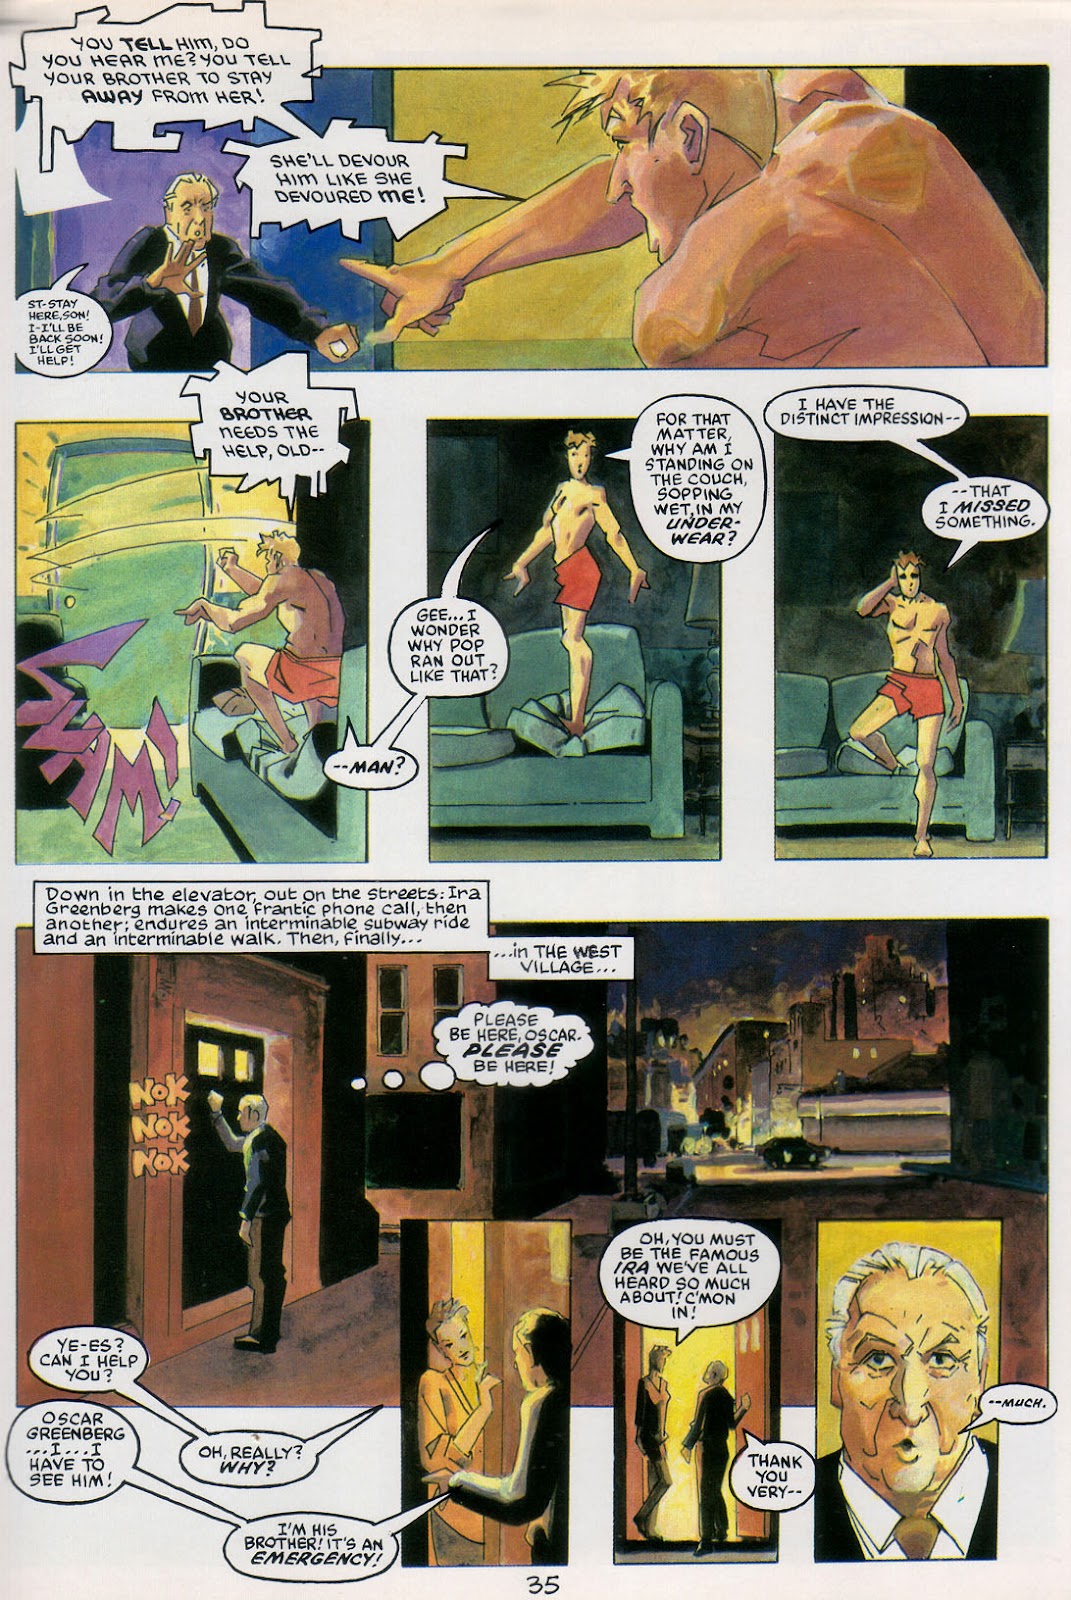 Marvel Graphic Novel issue 20 - Greenberg the Vampire - Page 39